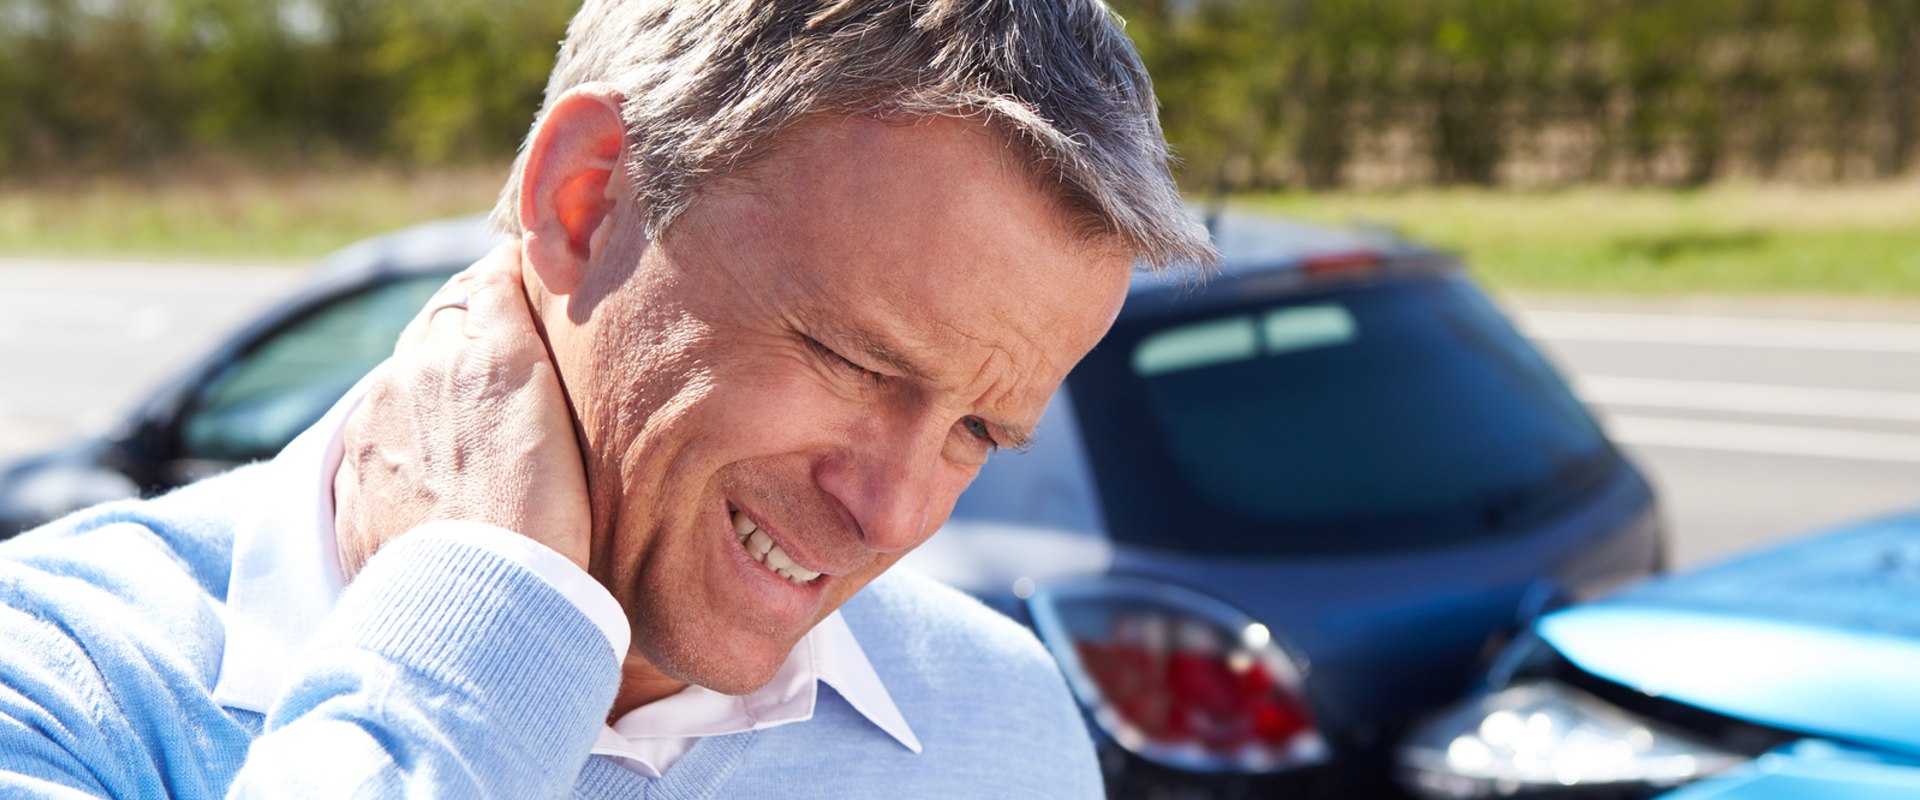 How Long Does It Take for Emergency Auto Accident Injury Chiropractic Treatment to Take Effect?